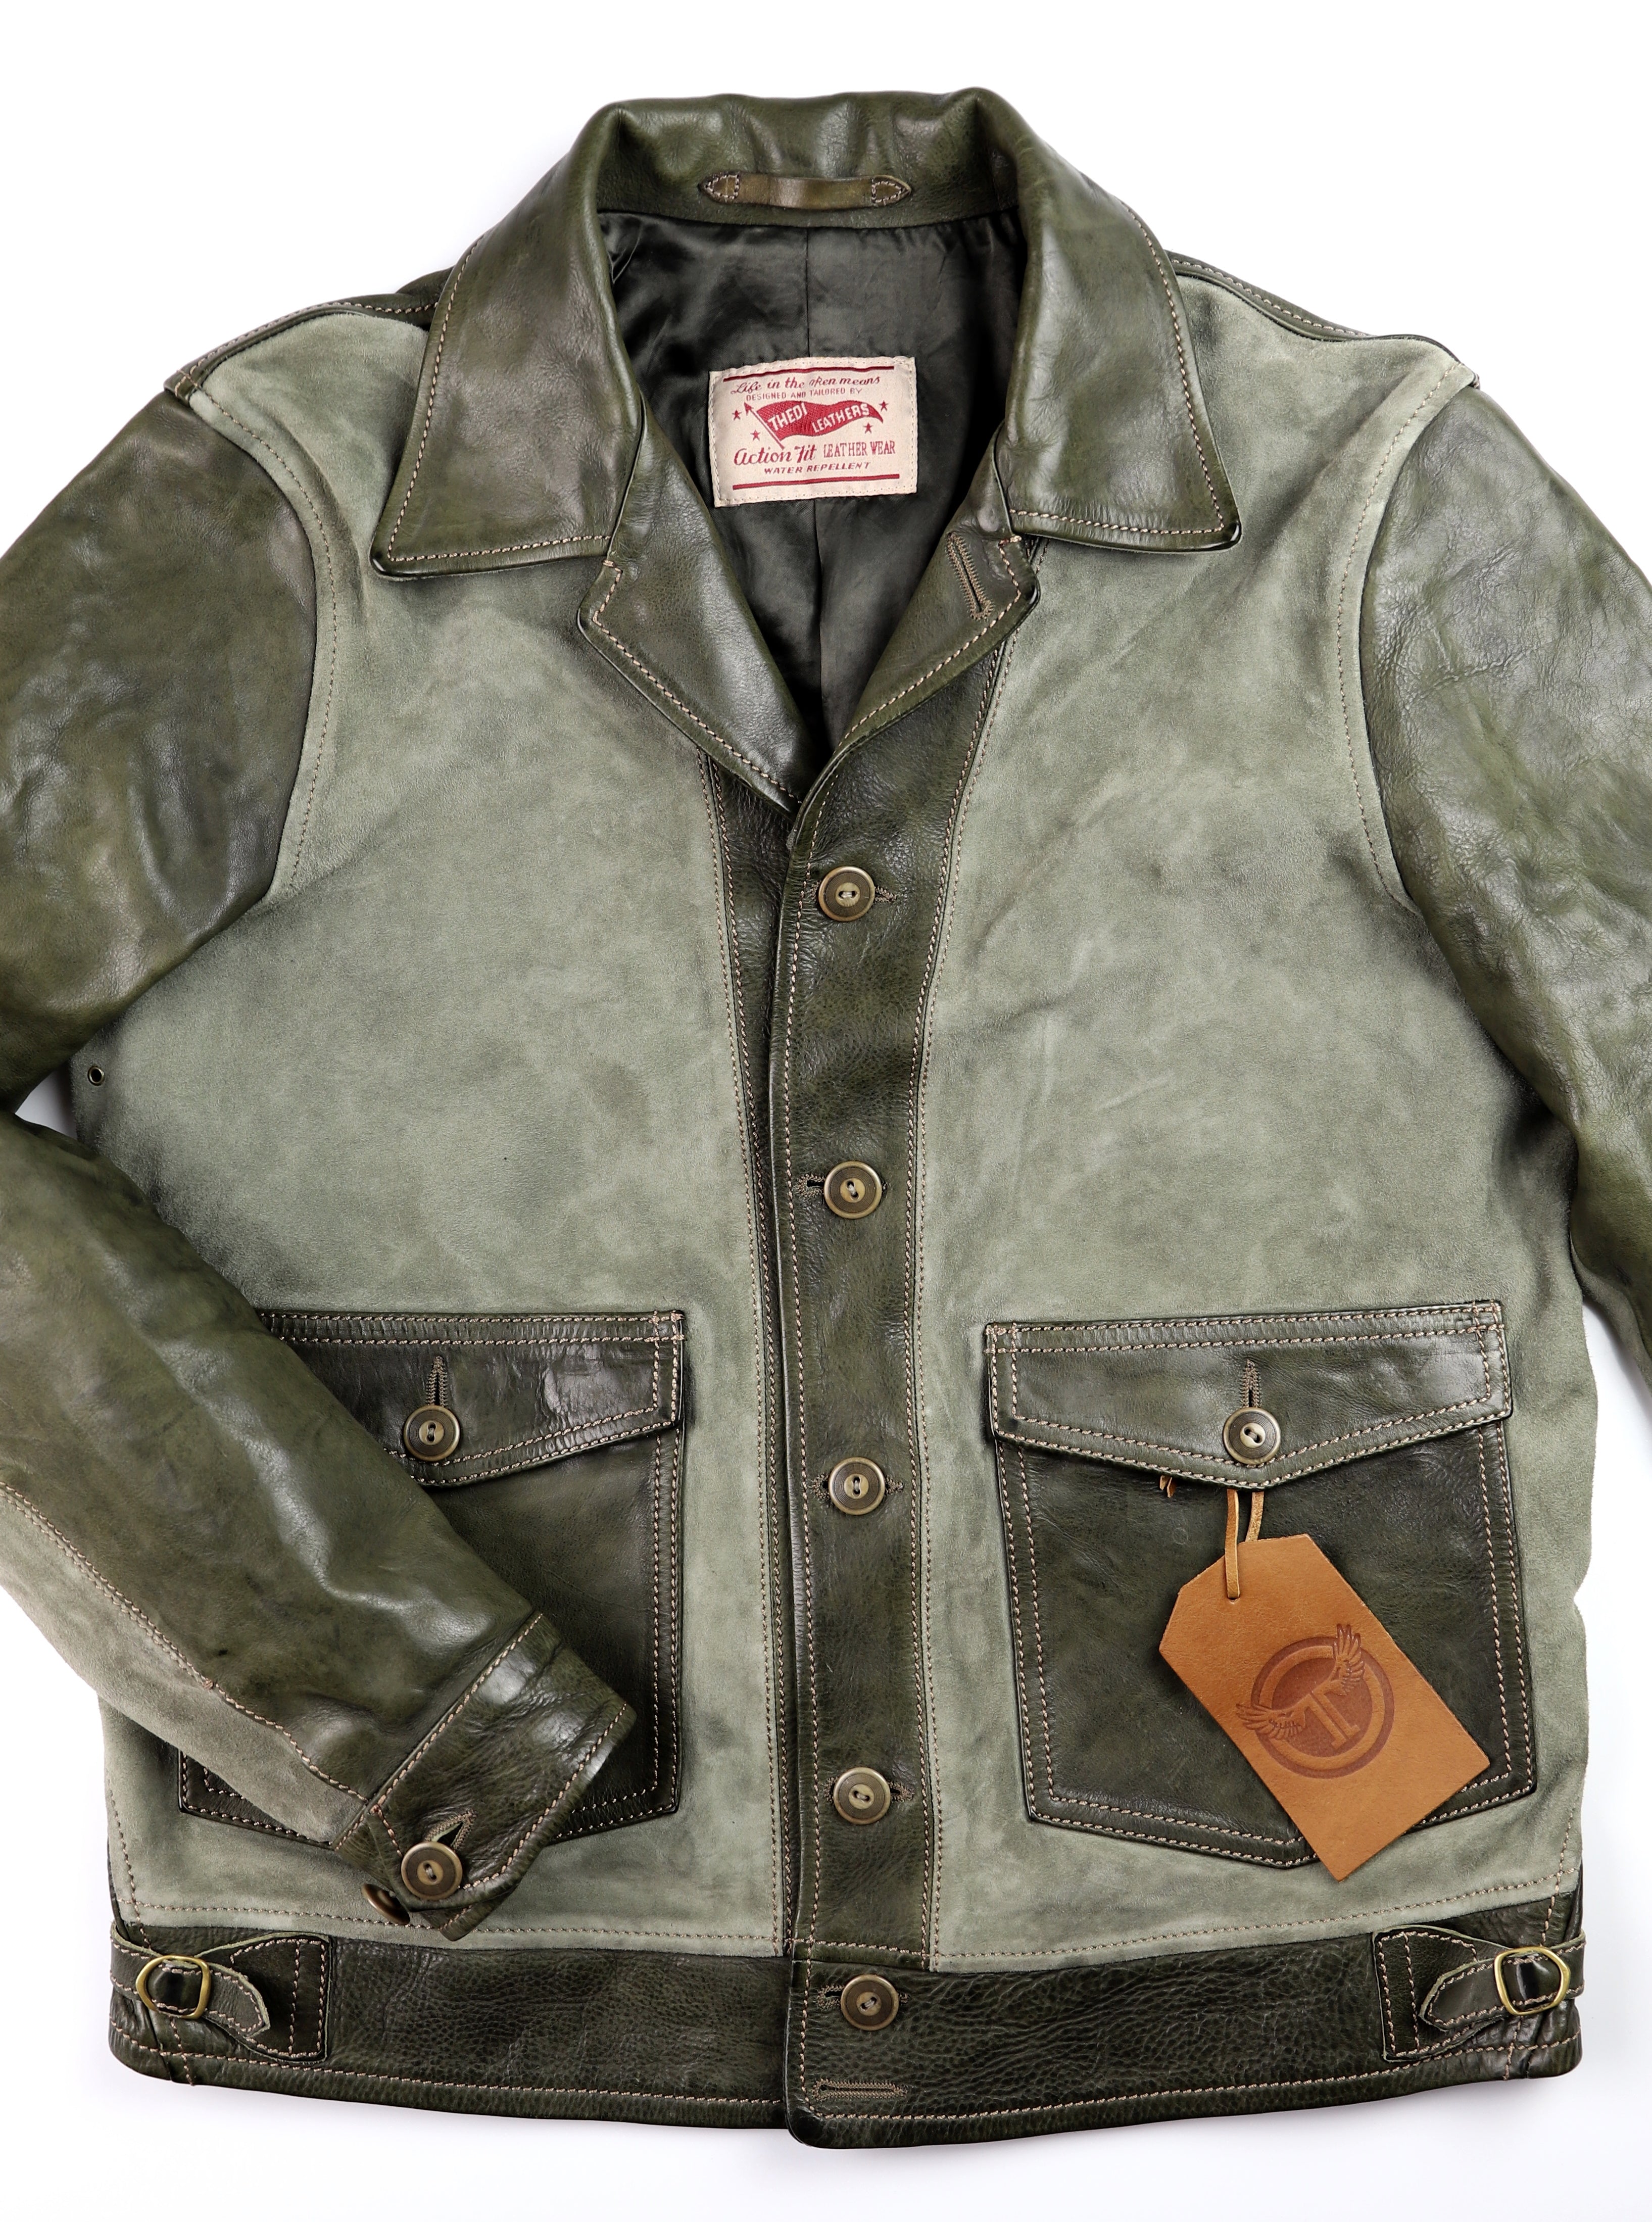 Thedi Niko Button-Up Jacket, size Large, Green Goat Suede and Cowhide